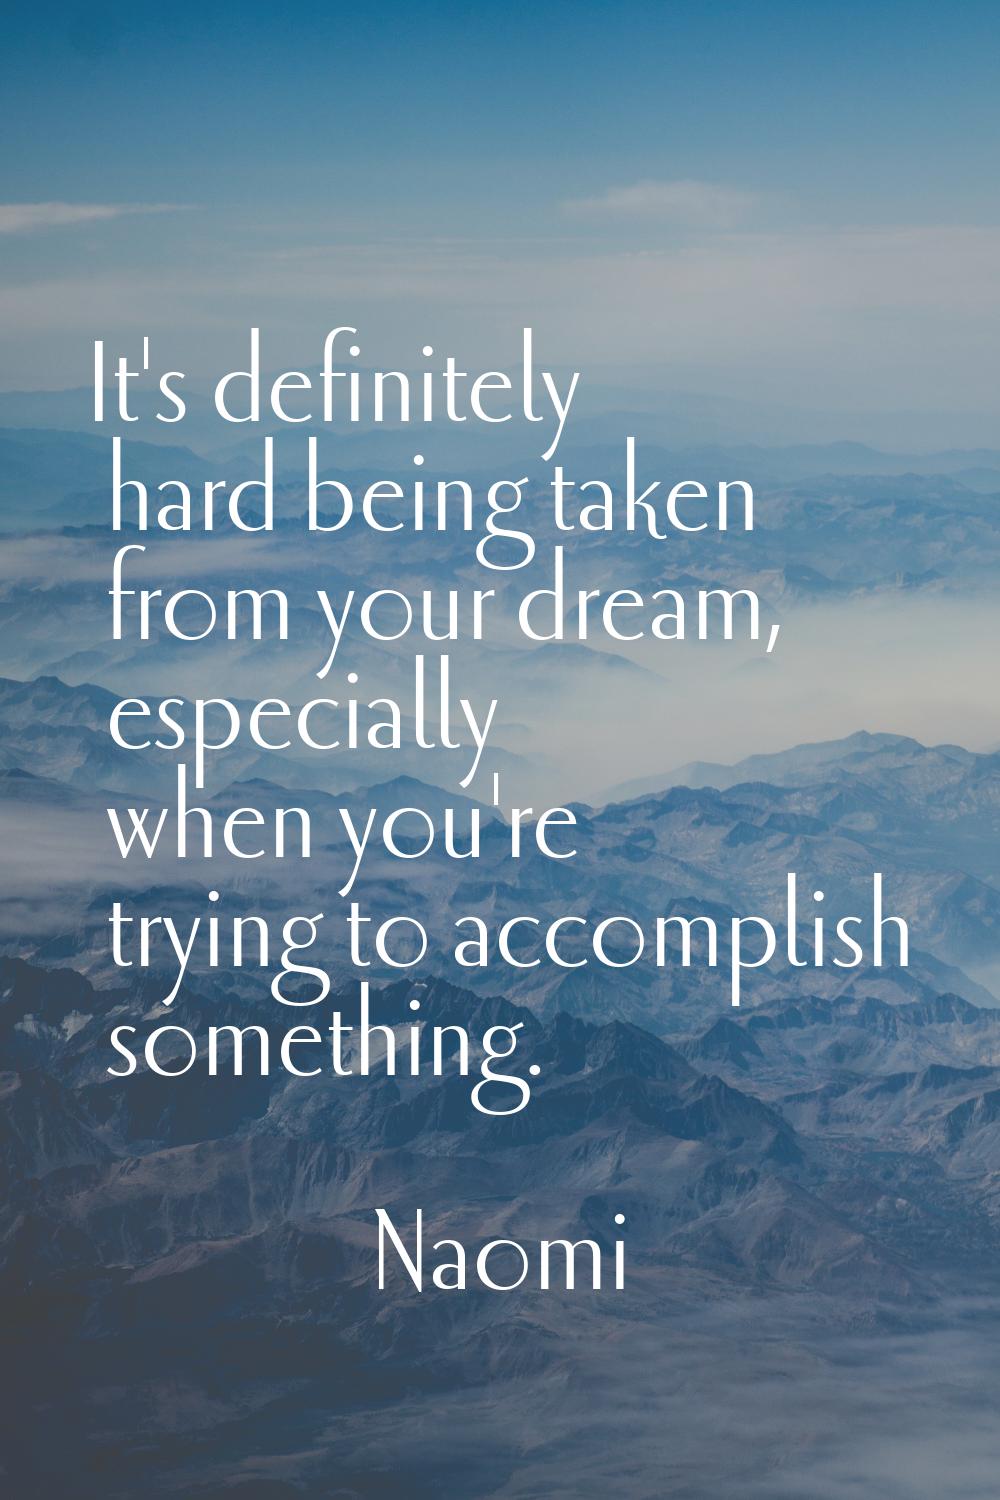 It's definitely hard being taken from your dream, especially when you're trying to accomplish somet